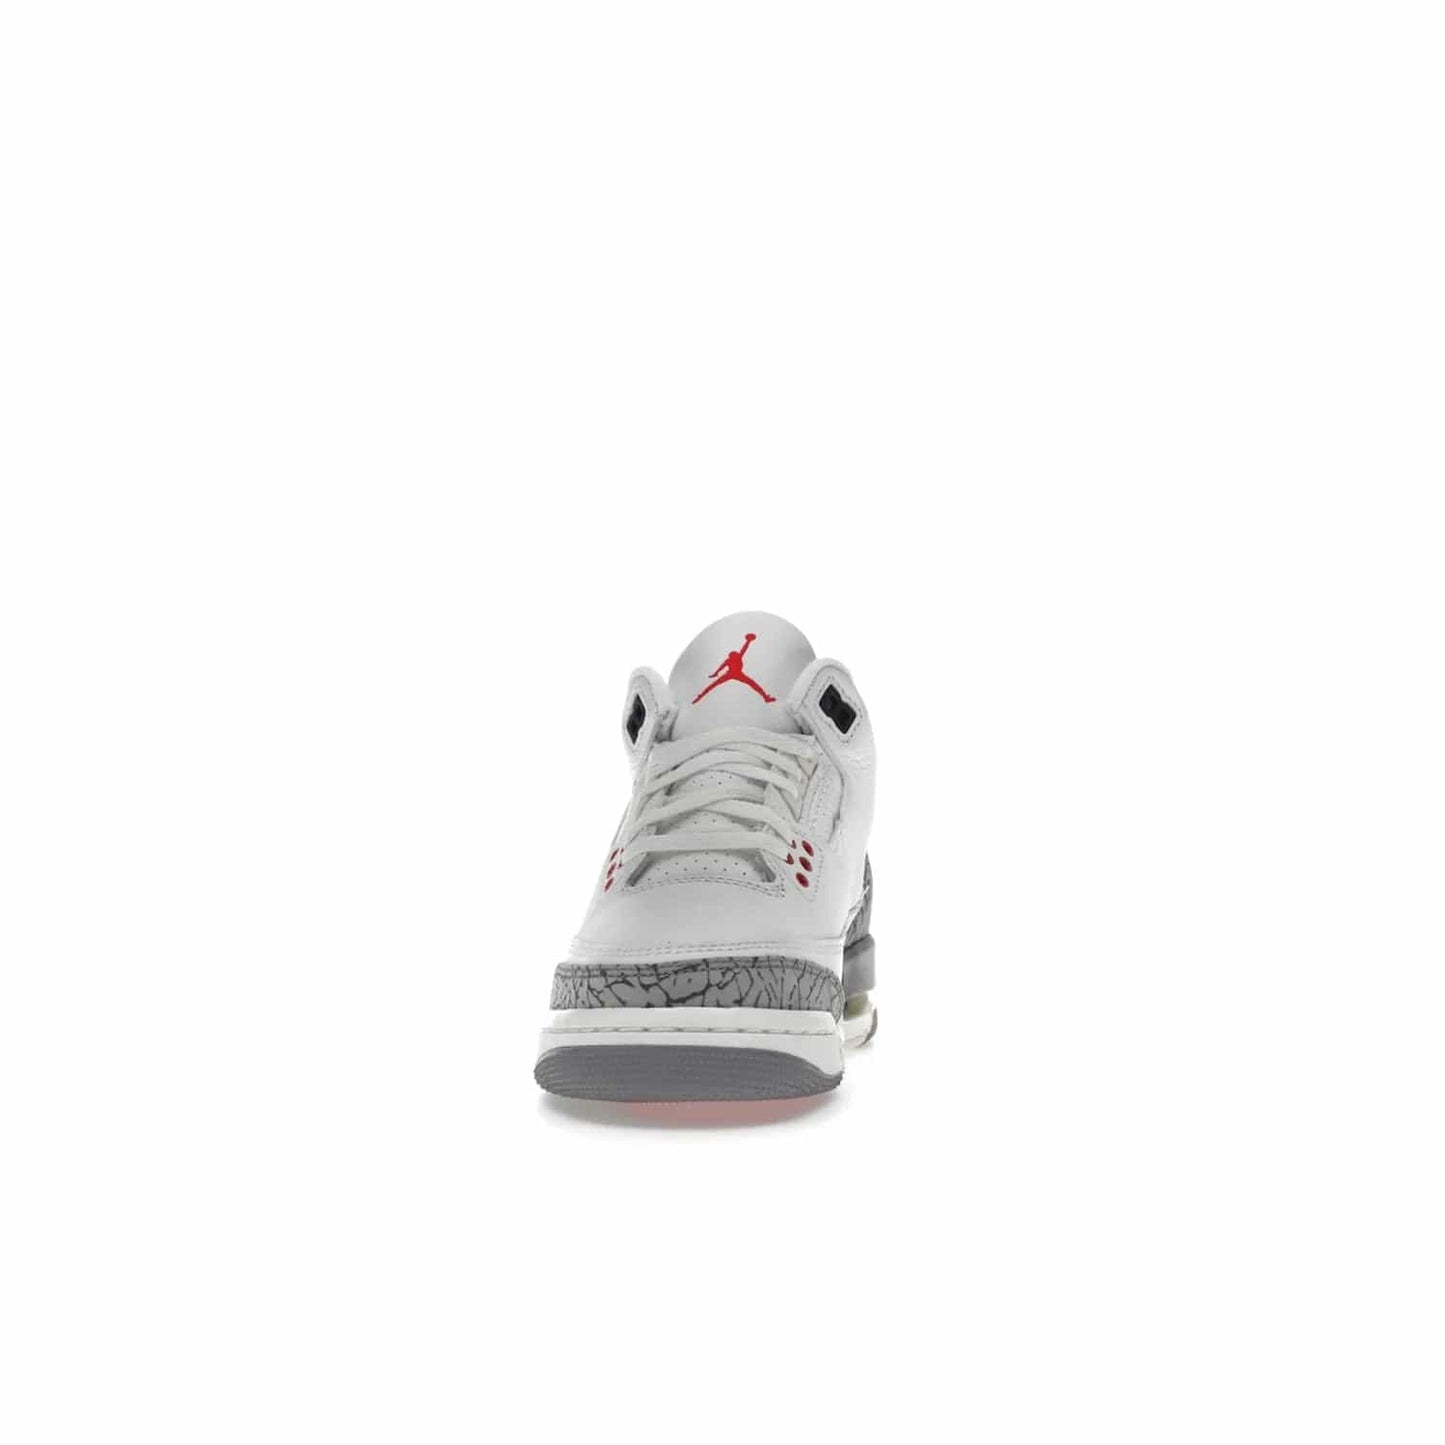 Jordan 3 Retro White Cement Reimagined (GS) - Image 11 - Only at www.BallersClubKickz.com - Grab the perfect blend of modern design and classic style with the Jordan 3 Retro White Cement Reimagined (GS). Features Summit White, Fire Red, Black, and Cement Grey colorway, iconic Jordan logo embroidered on the tongue, and “Nike Air” branding. Limited availability, get your pair before March 11th 2023.